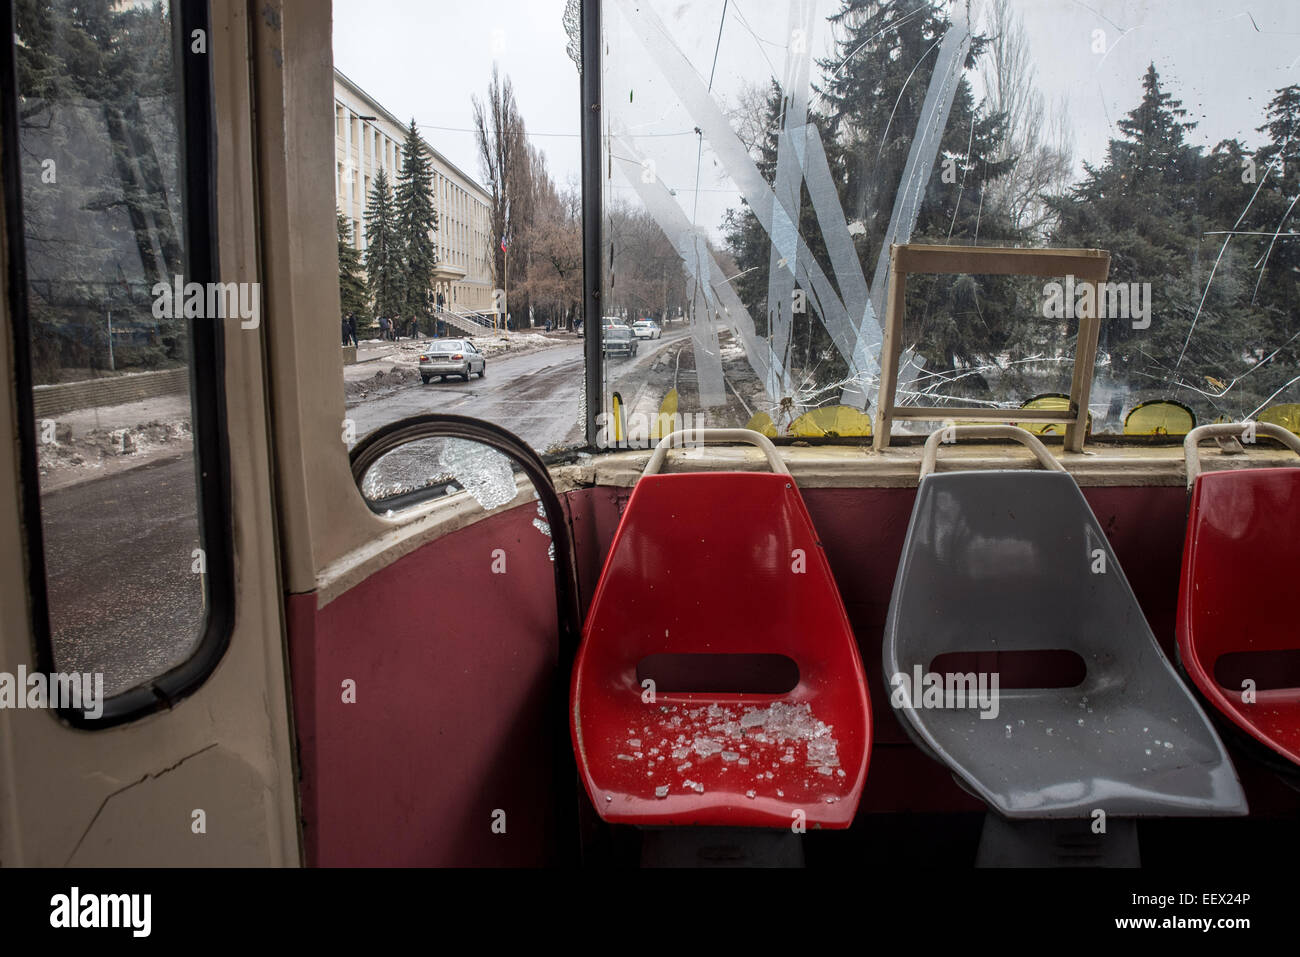 The shattered window of a trolly that was hit by mortar fire this morning in Donetsk, 22 January 2015. The DNR government has blamed pro-Ukrainian partisans for the attack. Unconfirmed reports claim that as many as 13 people died and up to 20 were wounded. Photo: James Sprankle/dpa (zu dpa 'Tote und Verletzte bei Granateneinschlag an Haltestelle in Donezk' am 22.01.2015) Stock Photo